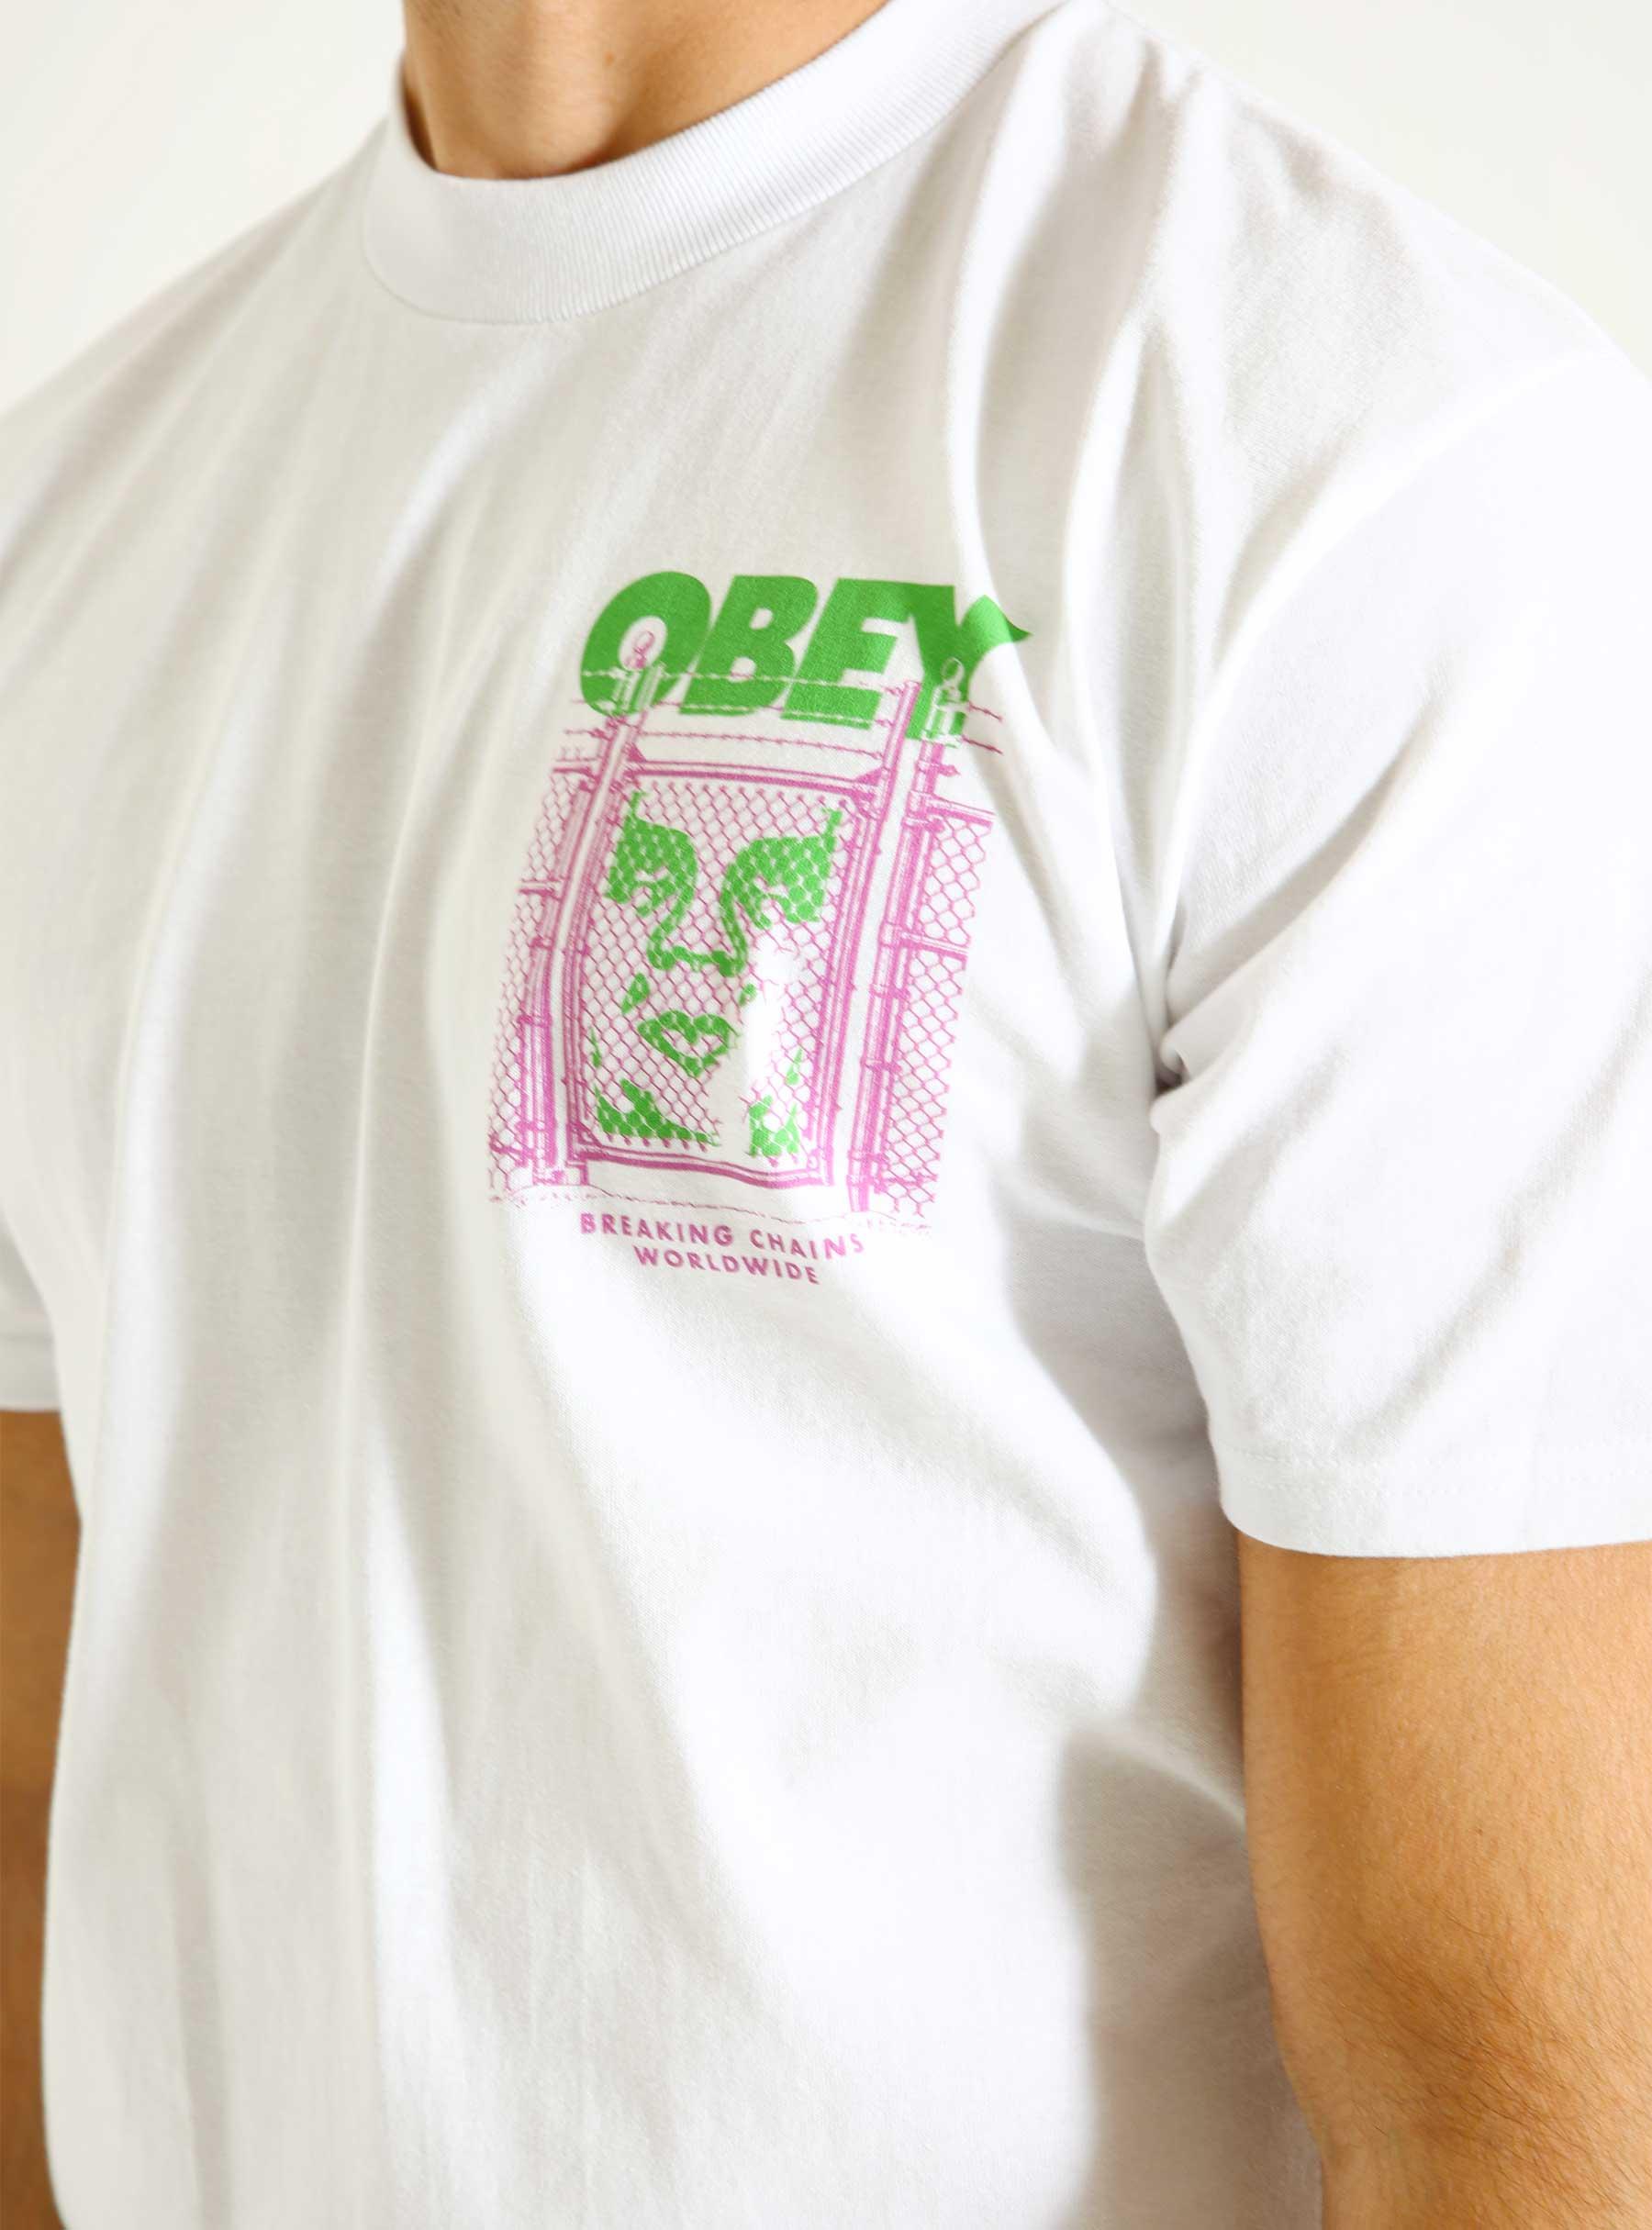 Obey Chain Link Fence icon T-Shirt White 165263799-WHT